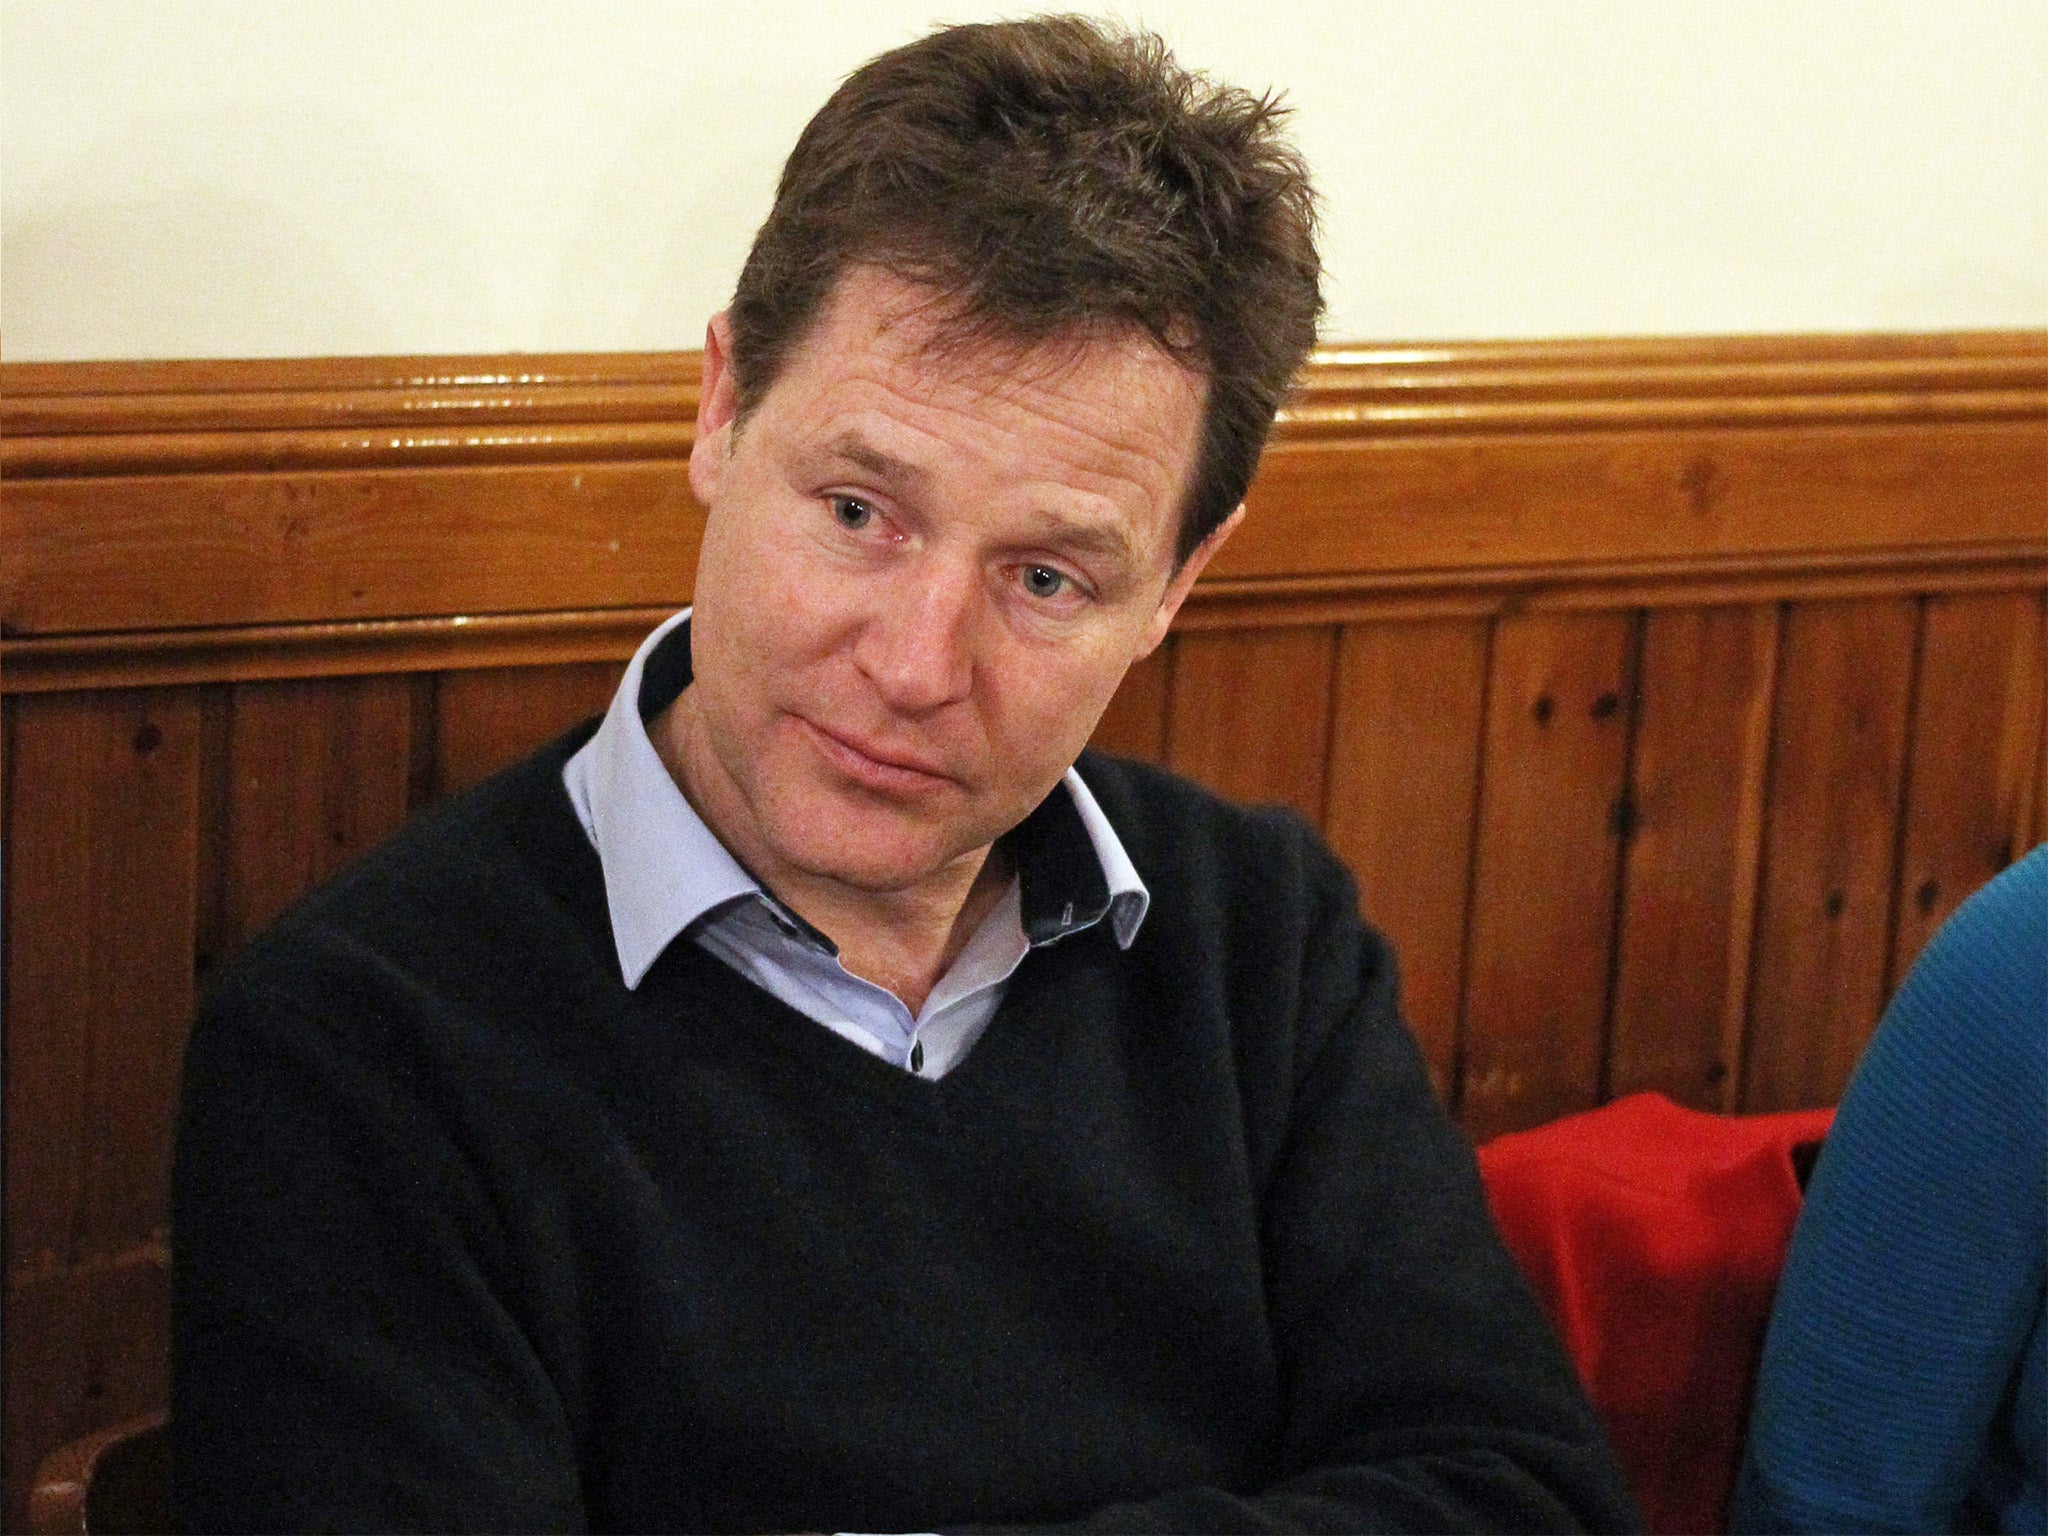 Nick Clegg on the campaign trail in Glasgow on Wednesday; he says education is his top priority